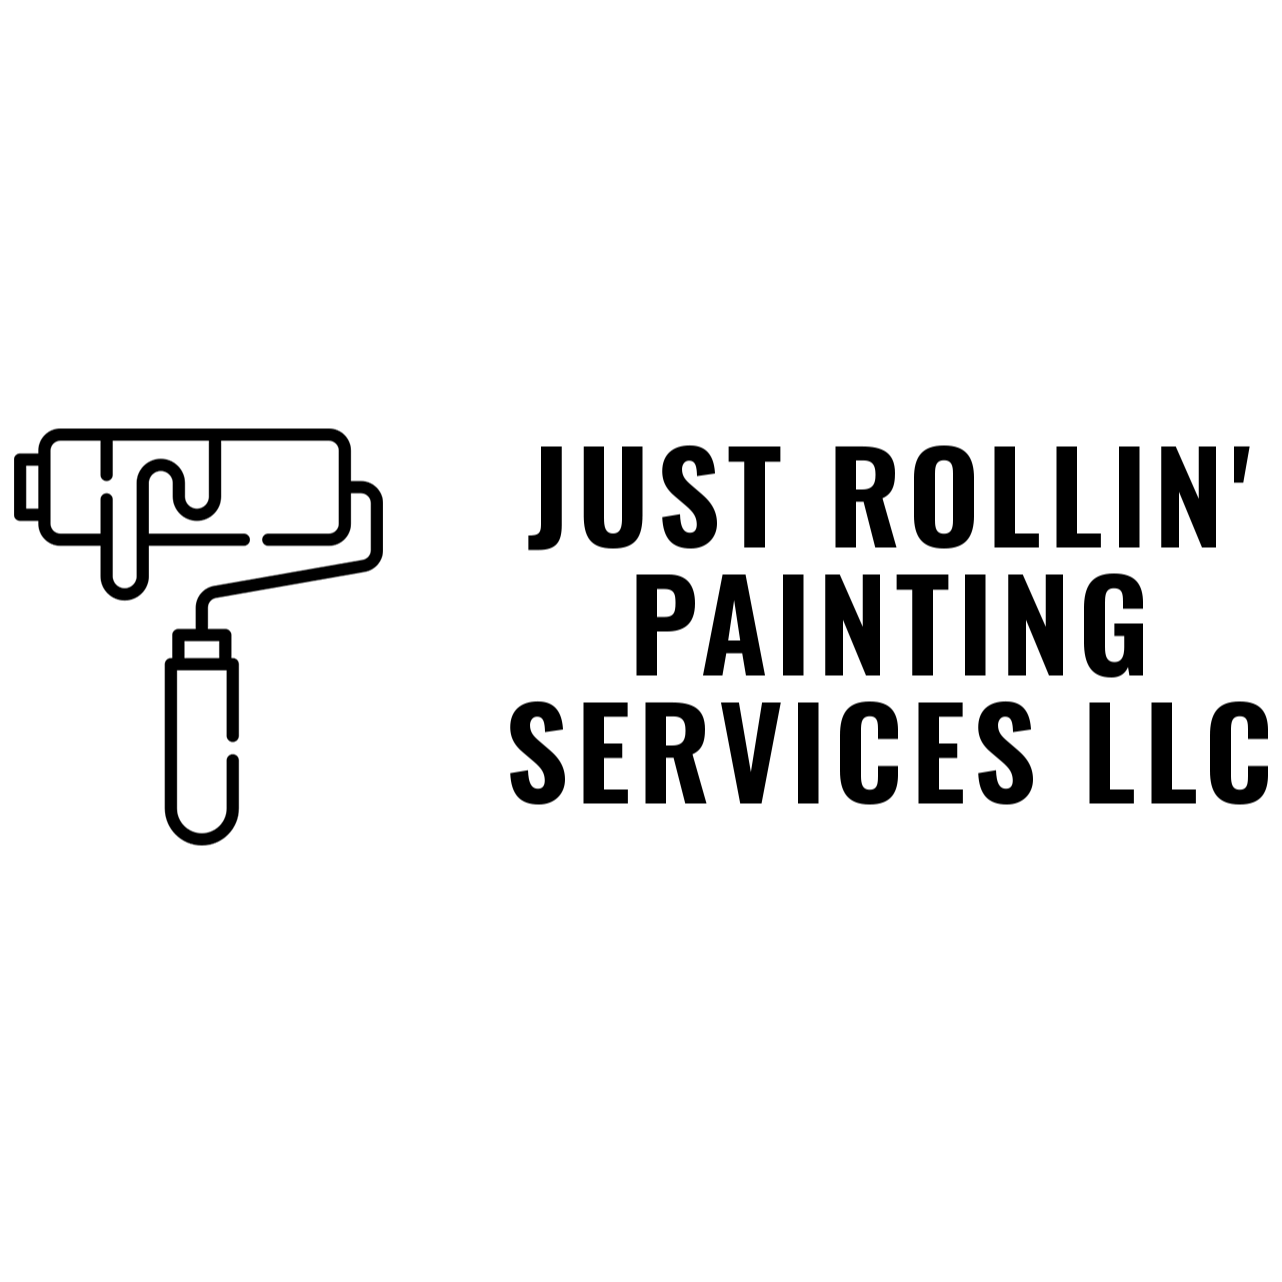 Just Rollin' Painting Services LLC